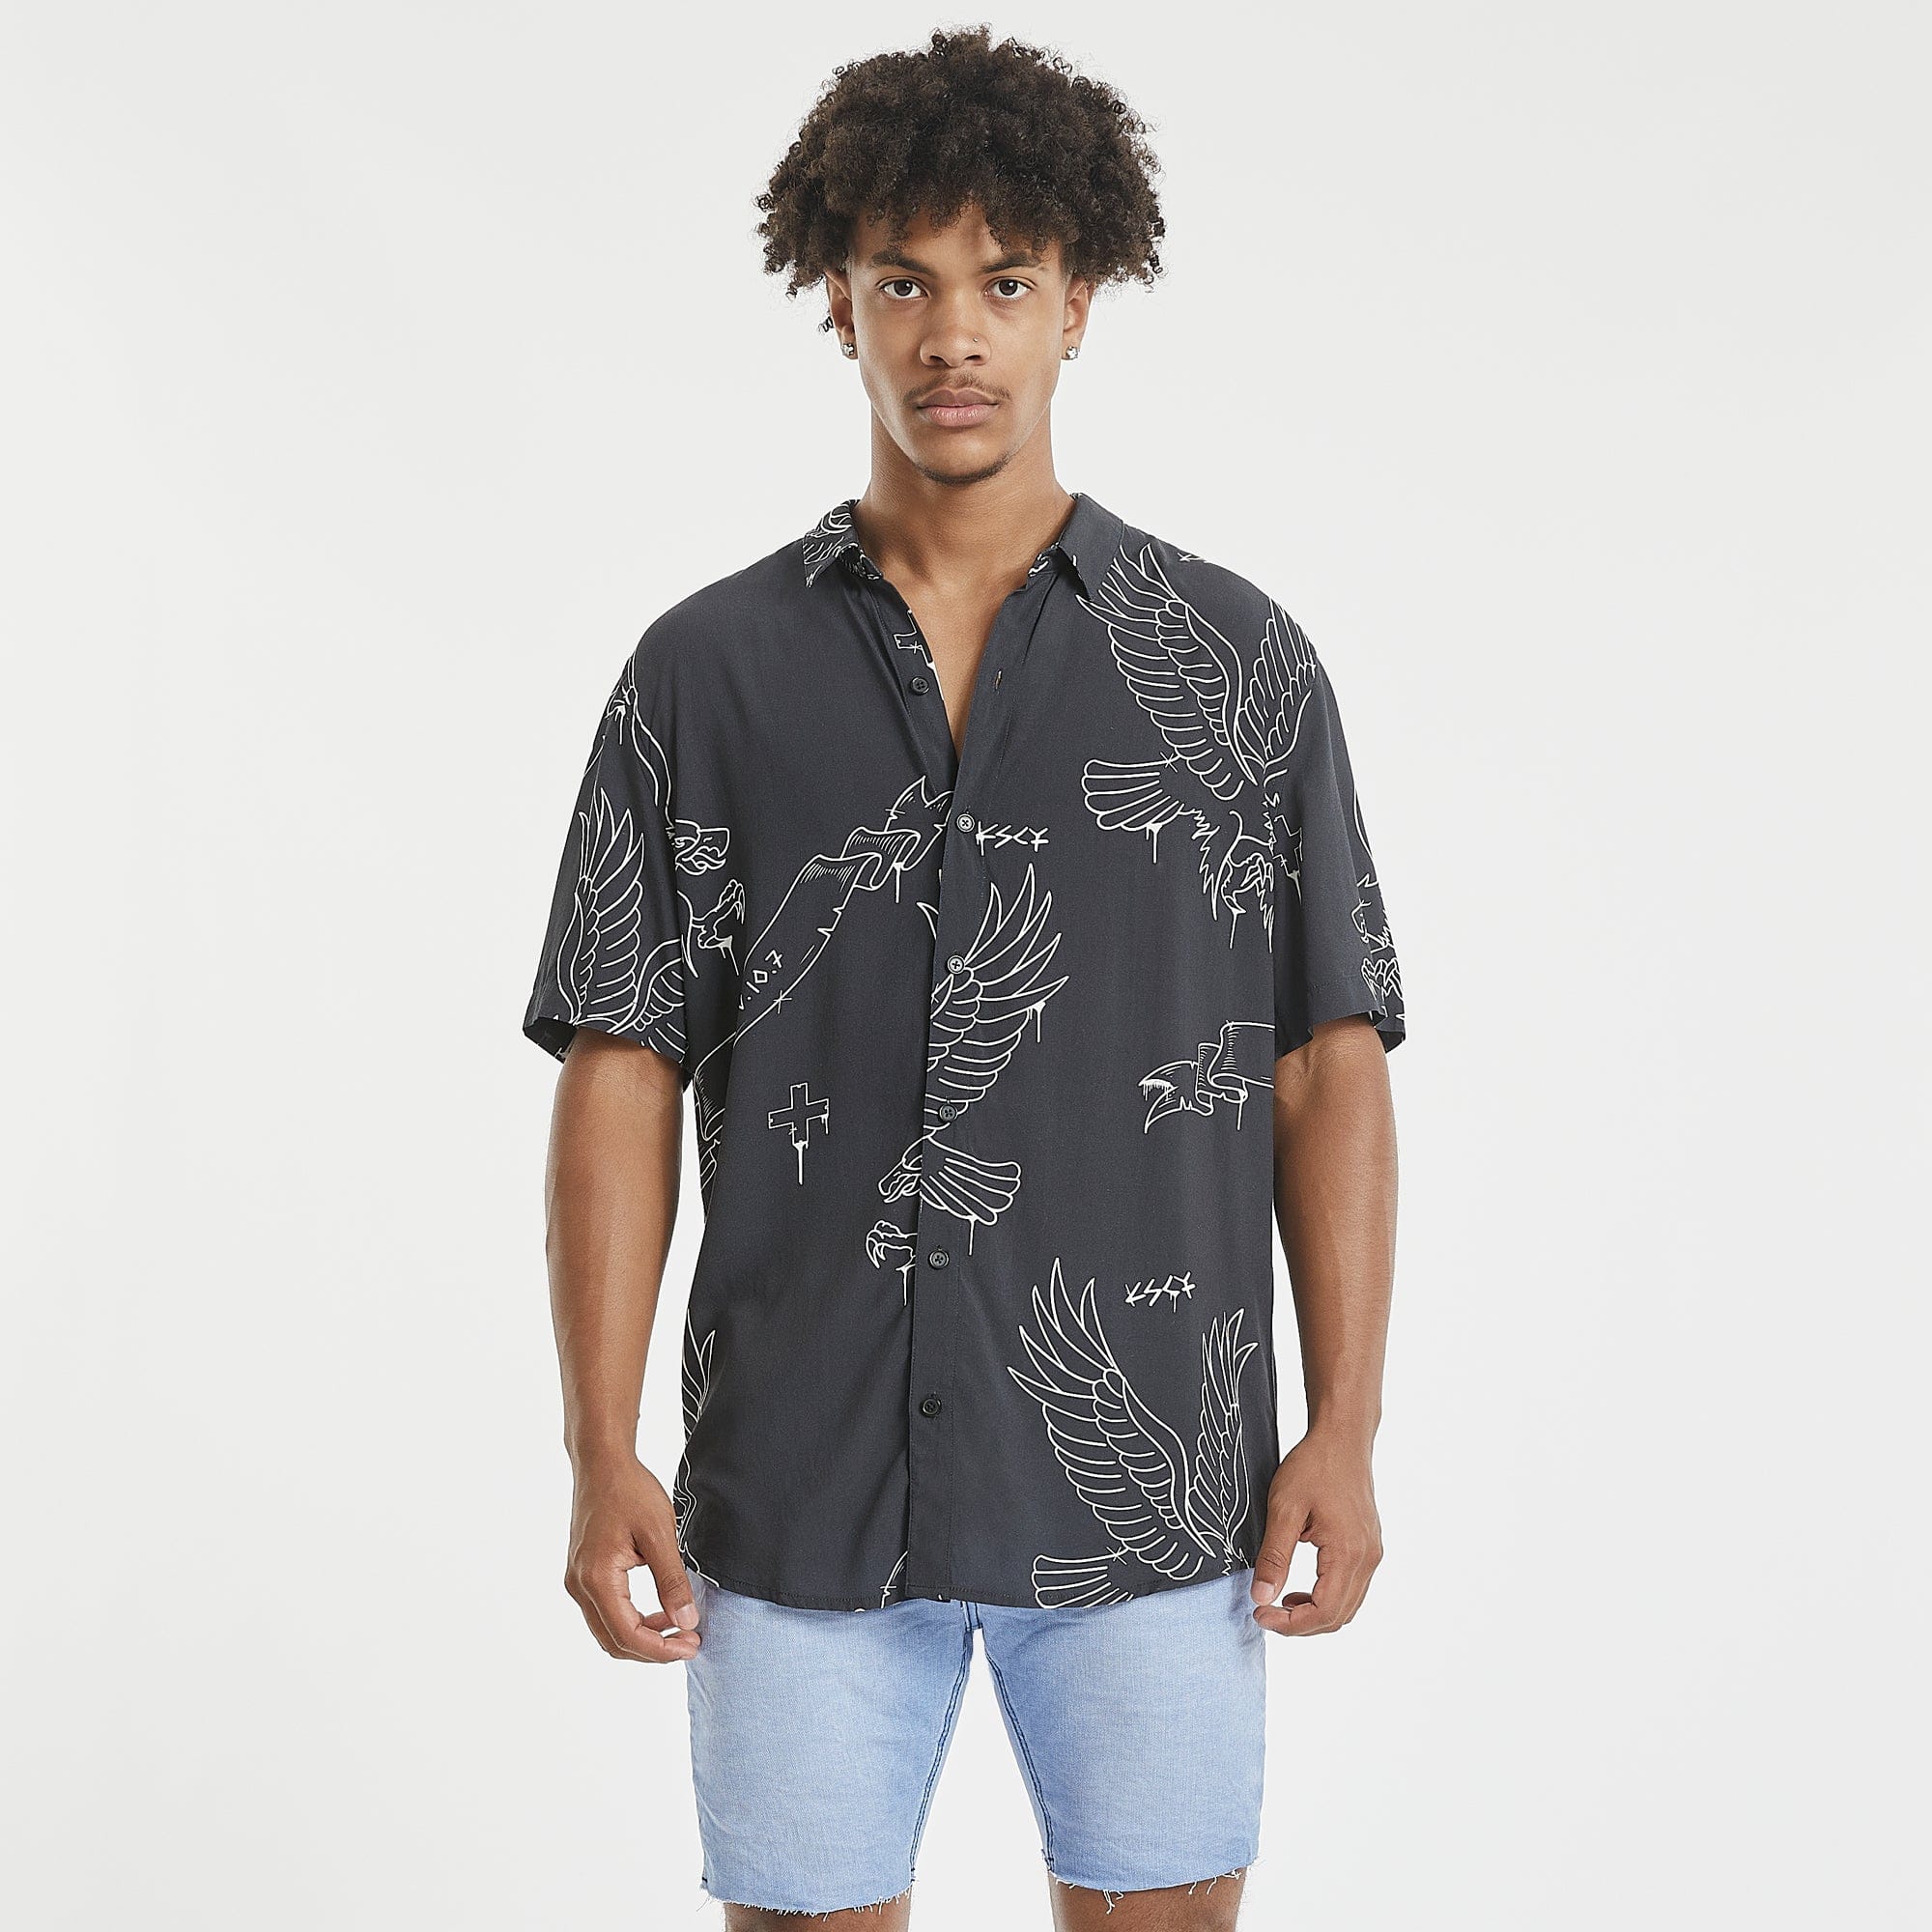 Songbird Relaxed Short Sleeve Shirt Black/White Print – Kiss Chacey